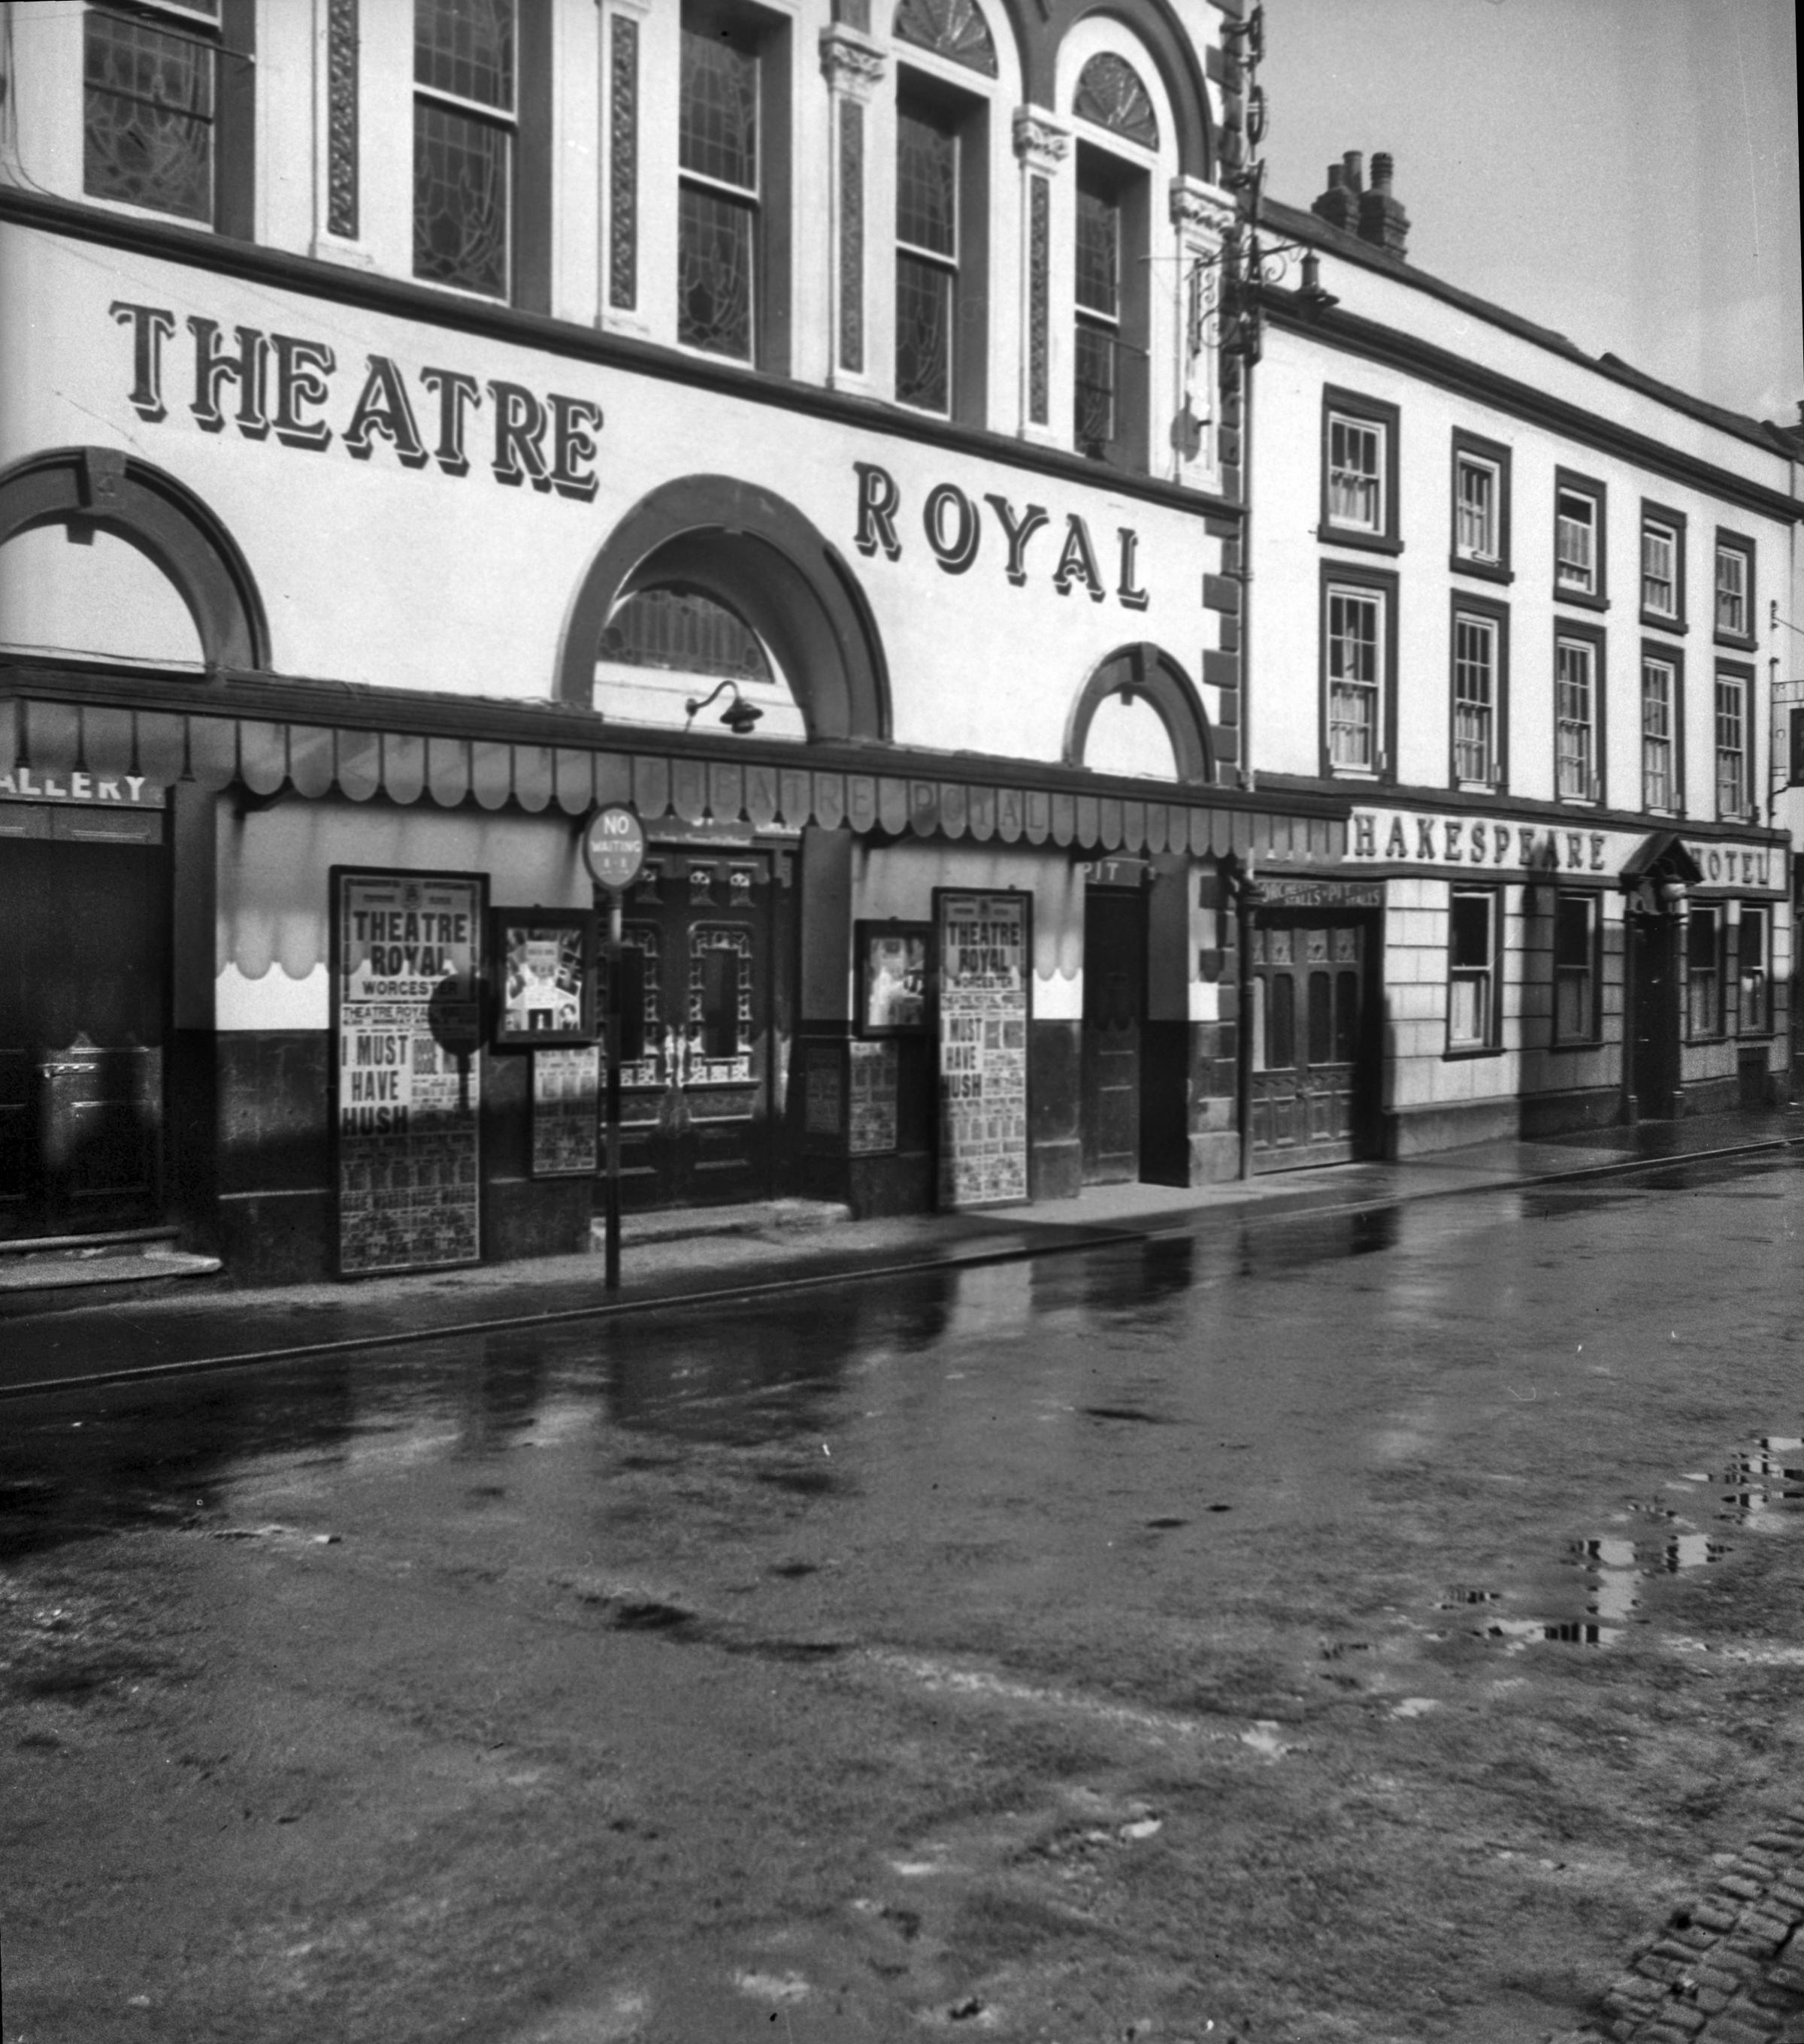 The Theatre Royal, Angel Street in 1951. This theatre was well known to many local people, before demolition in the mid-20th century. It was replaced by the Colmore Depot car showroom which subsequently became a supermarket